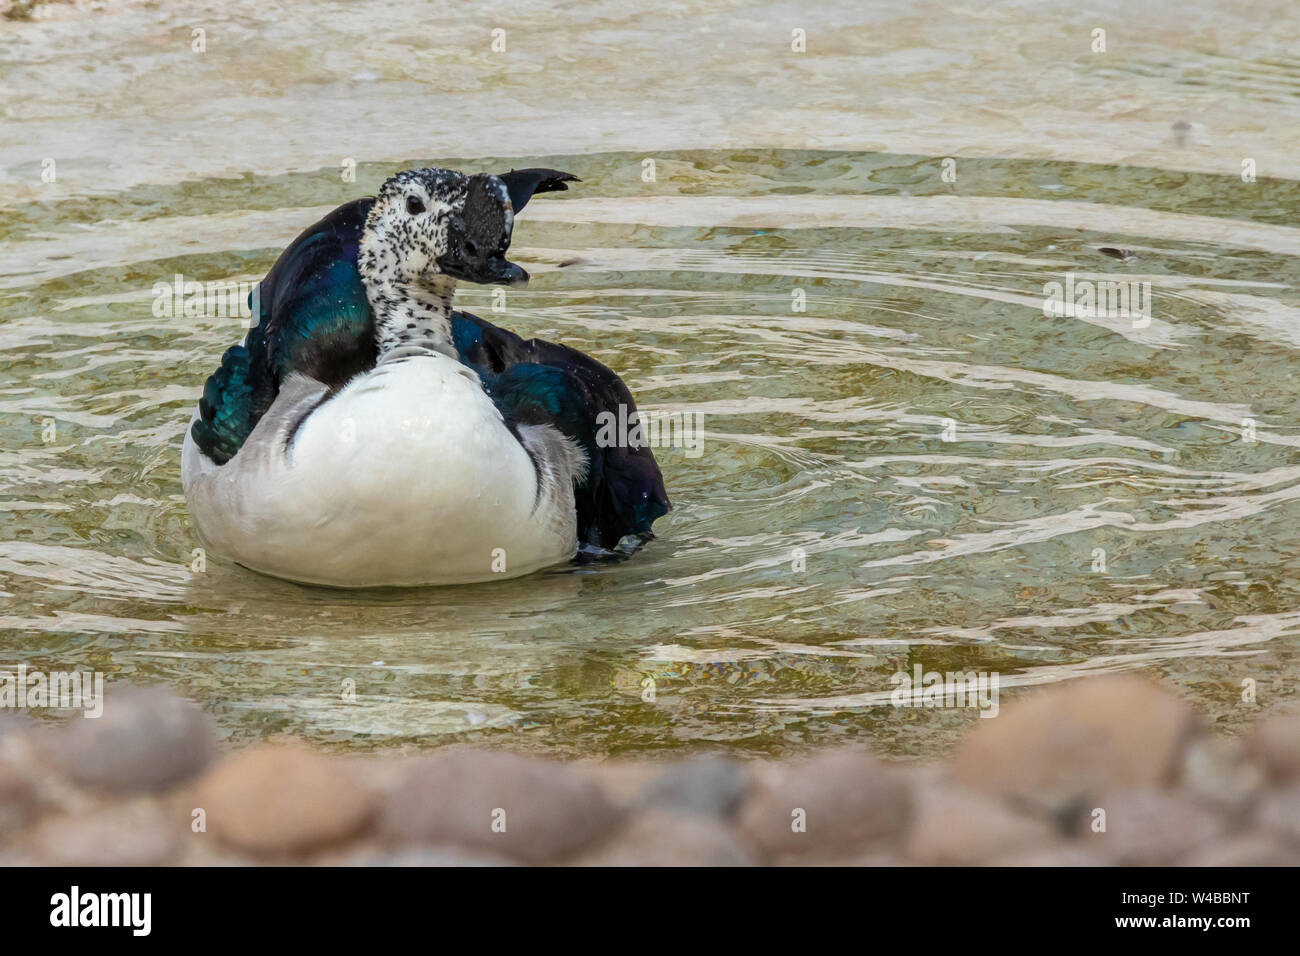 African comb or knob-billed duck swimming in water pond. Stock Photo